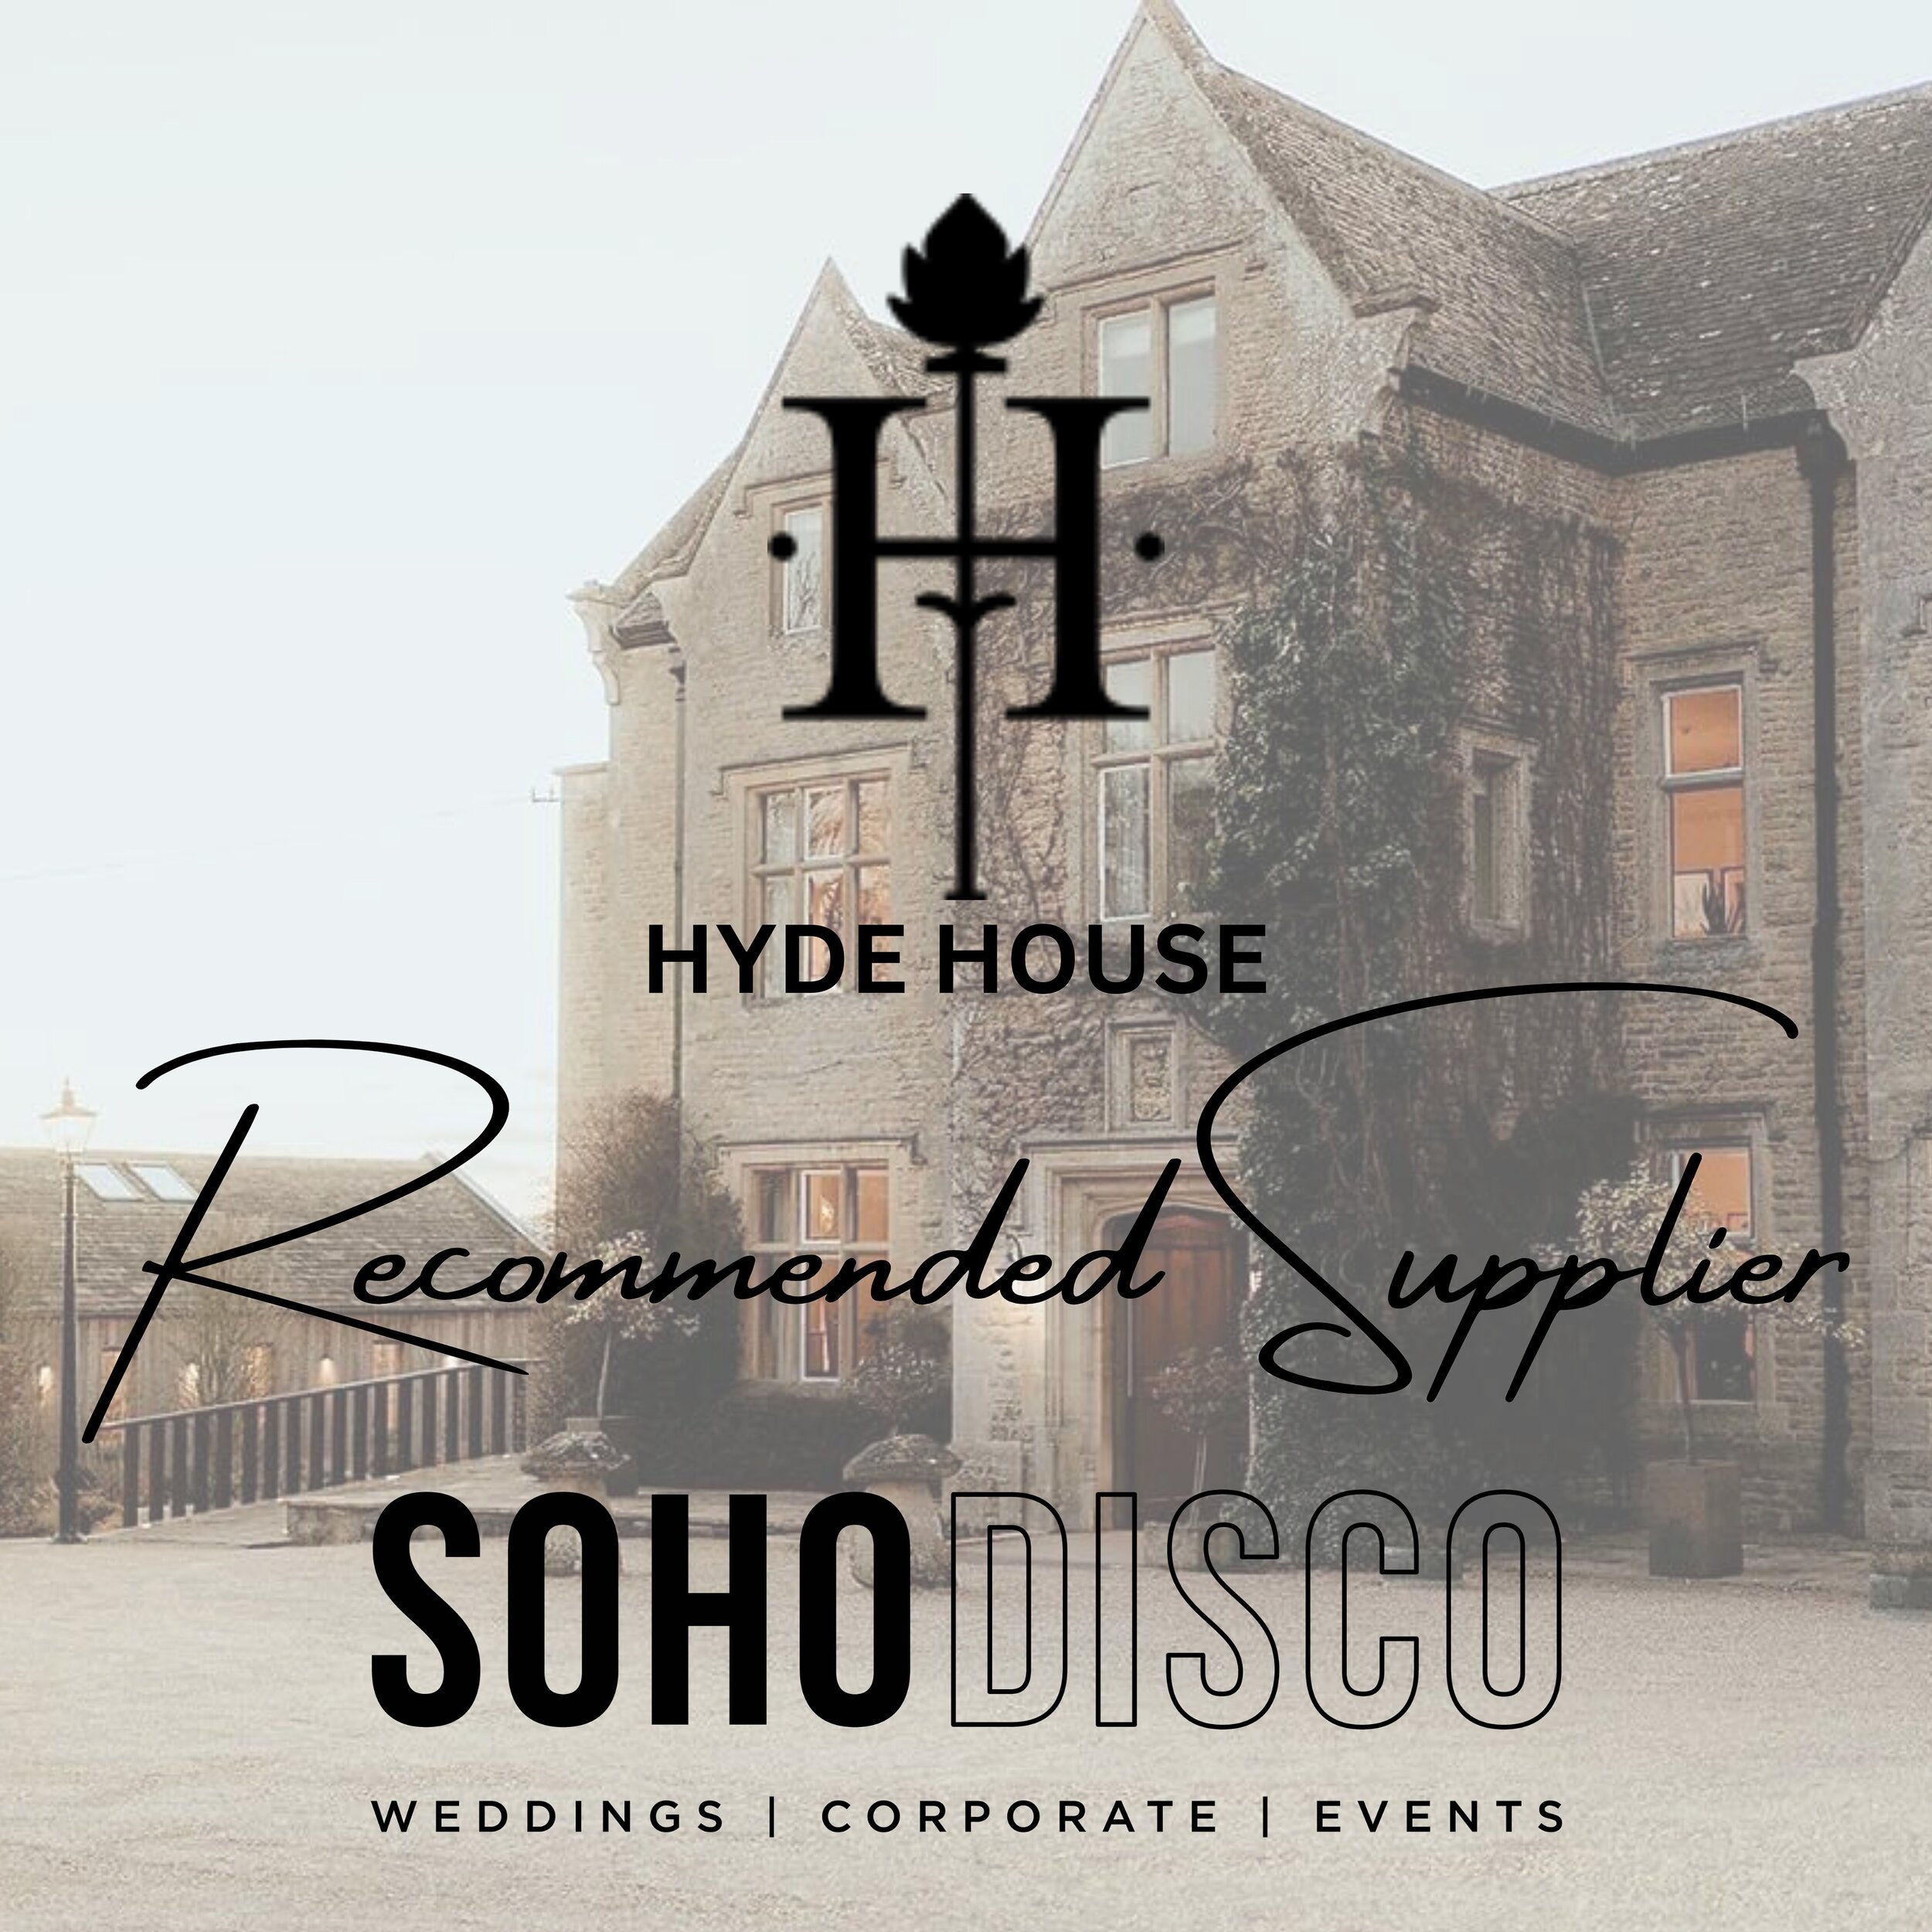 So this happened! Completely by surprise we are now a Recommended Supplier at @hyde_house which we are so proud of! Can&rsquo;t wait to walk through those doors many more times! And hopefully get some amazing pizza!